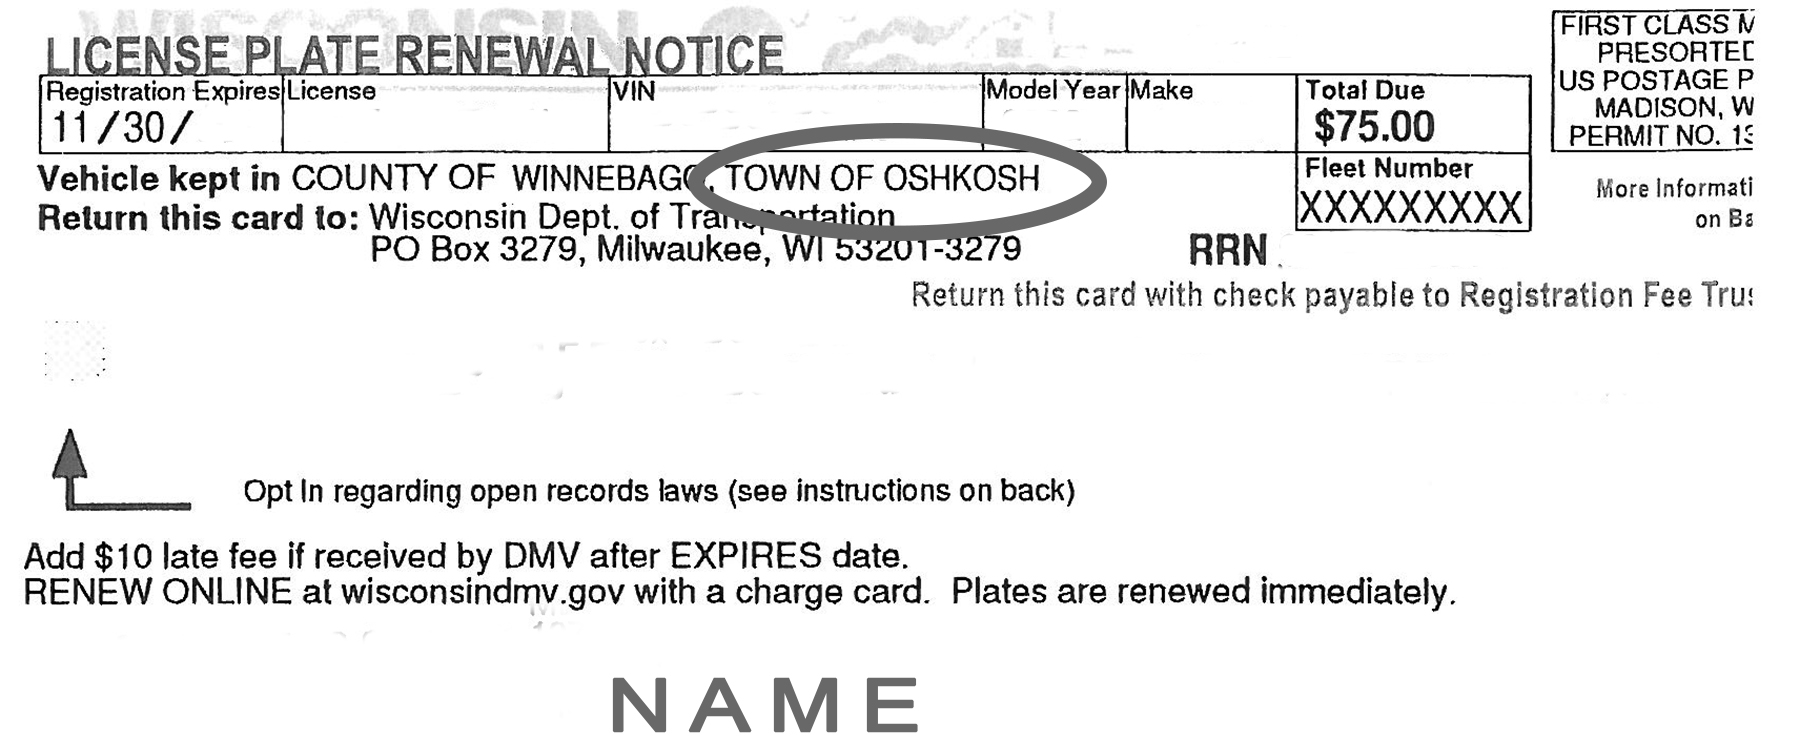 Be vigilant when renewing your vehicle license plate